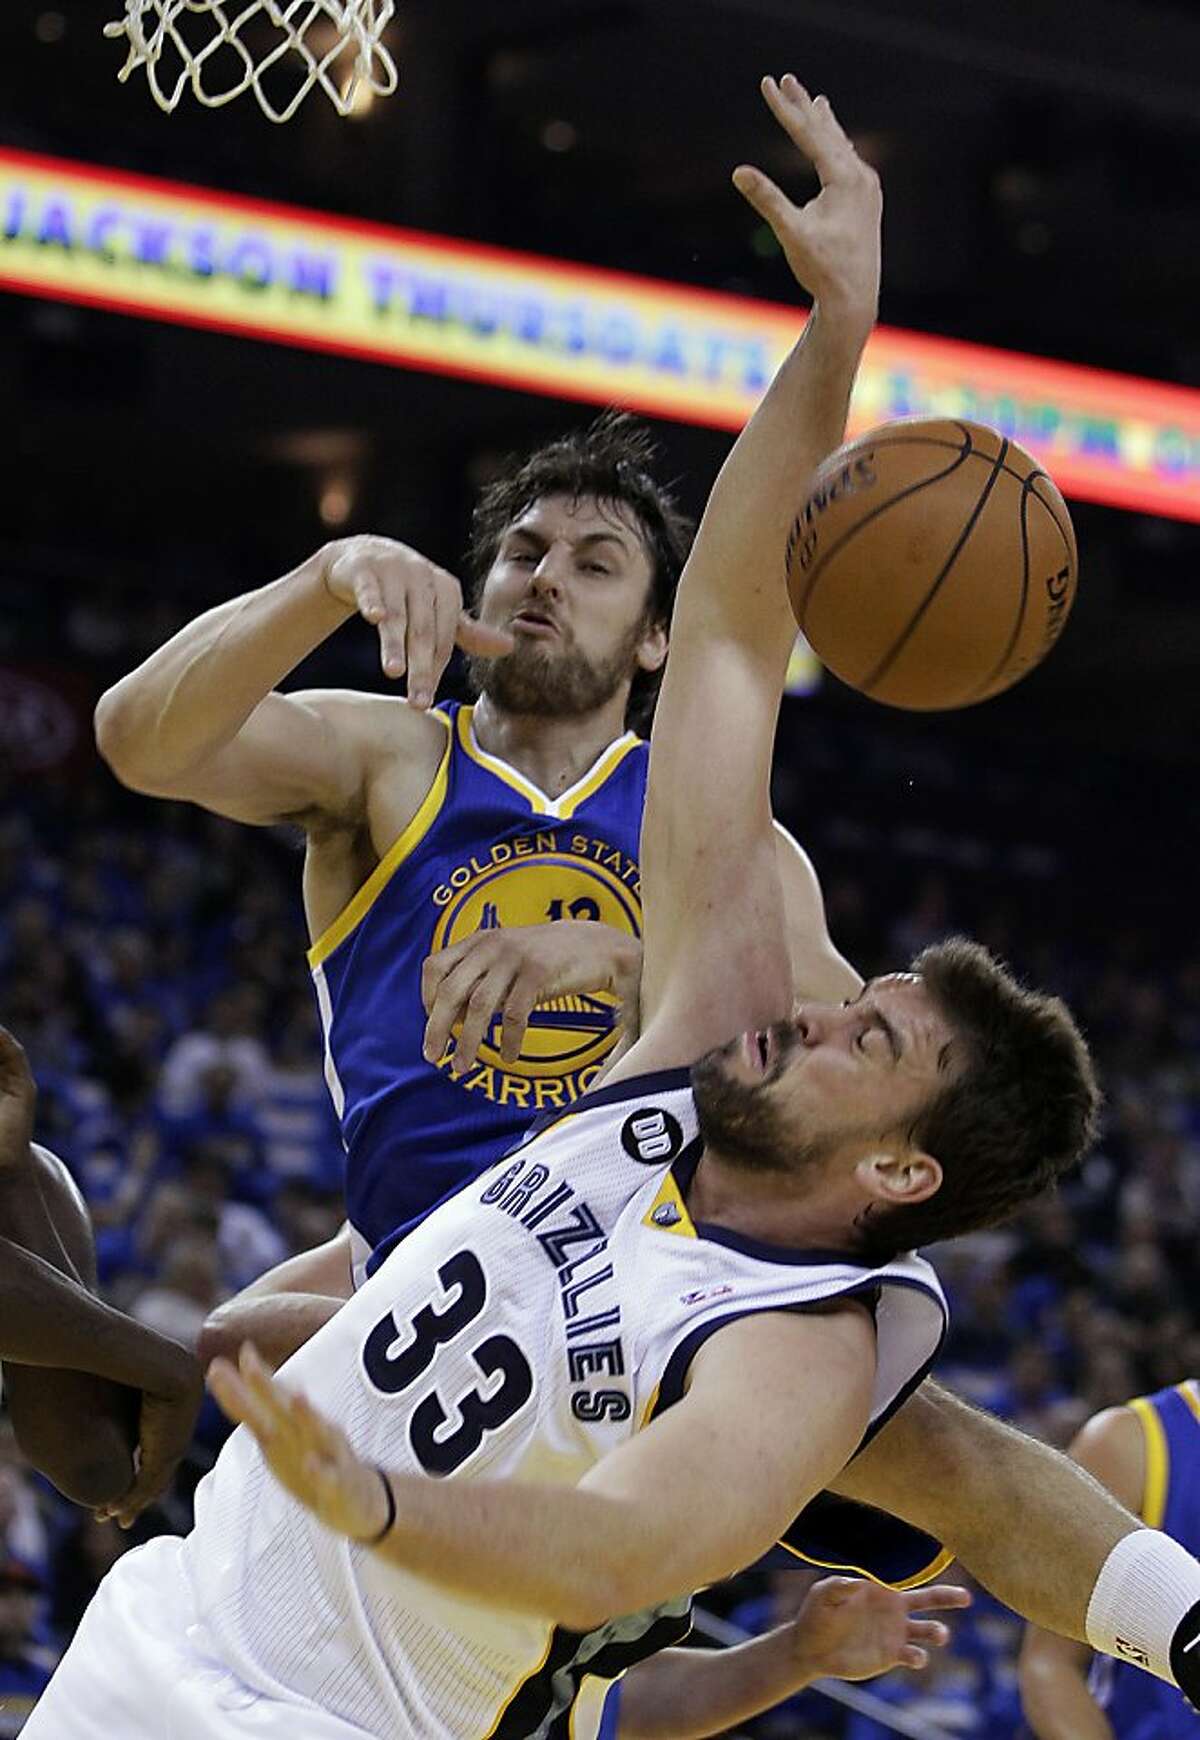 Memphis Grizzlies' Marc Gasol (33) has his shot blocked by Golden State Warriors' Andrew Bogut during the first half of an NBA basketball game Friday, Nov. 2, 2012, in Oakland, Calif. (AP Photo/Ben Margot)